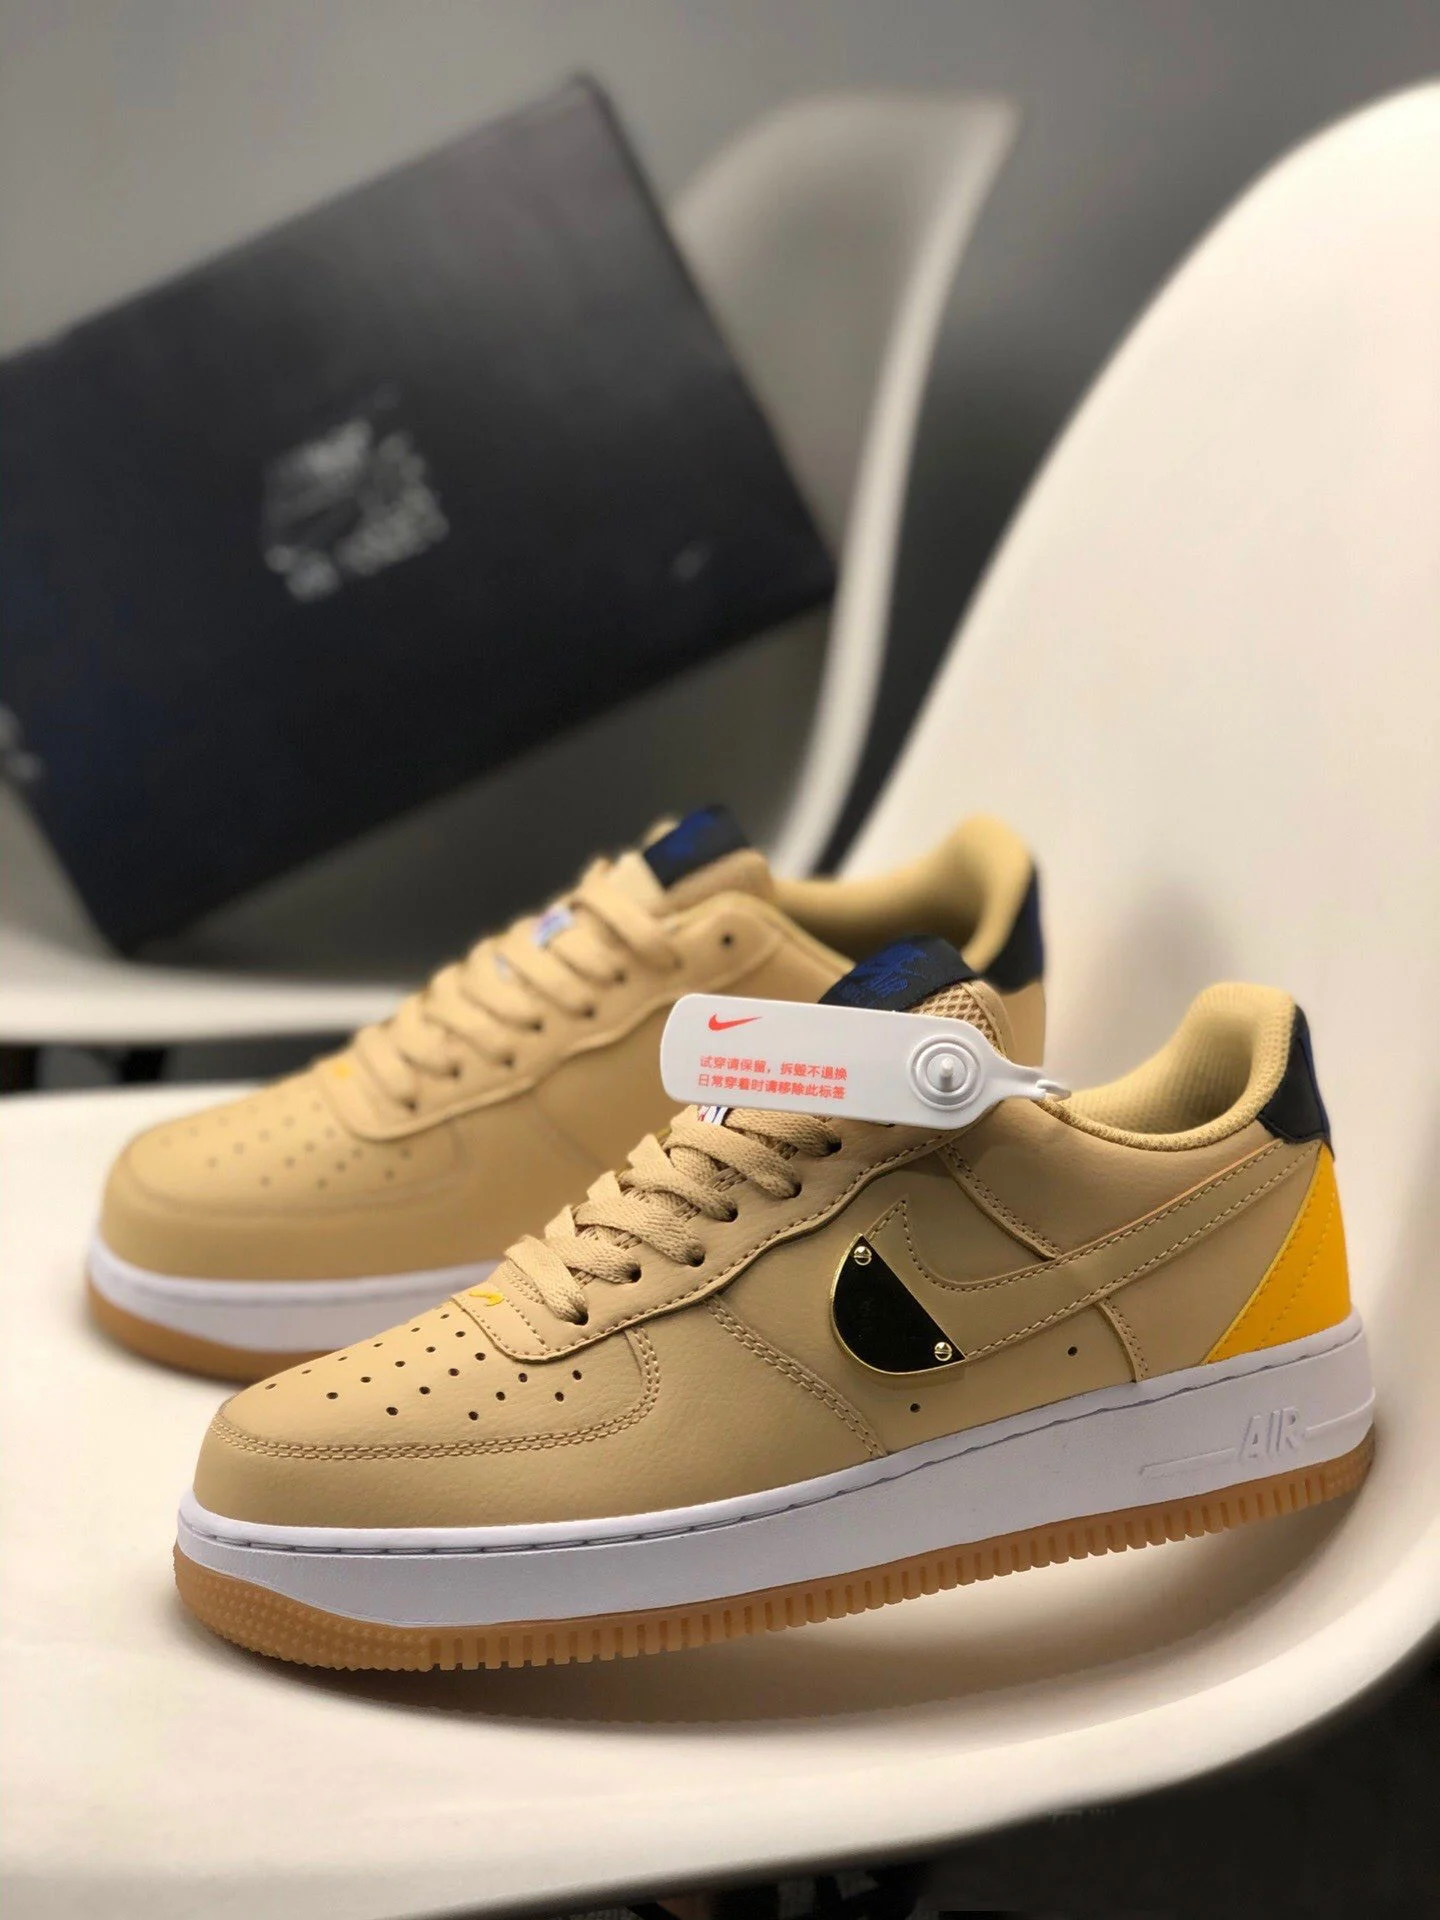 NBA x Nike Air Force 1 Low Tan Yellow CT2298-200 For Sale